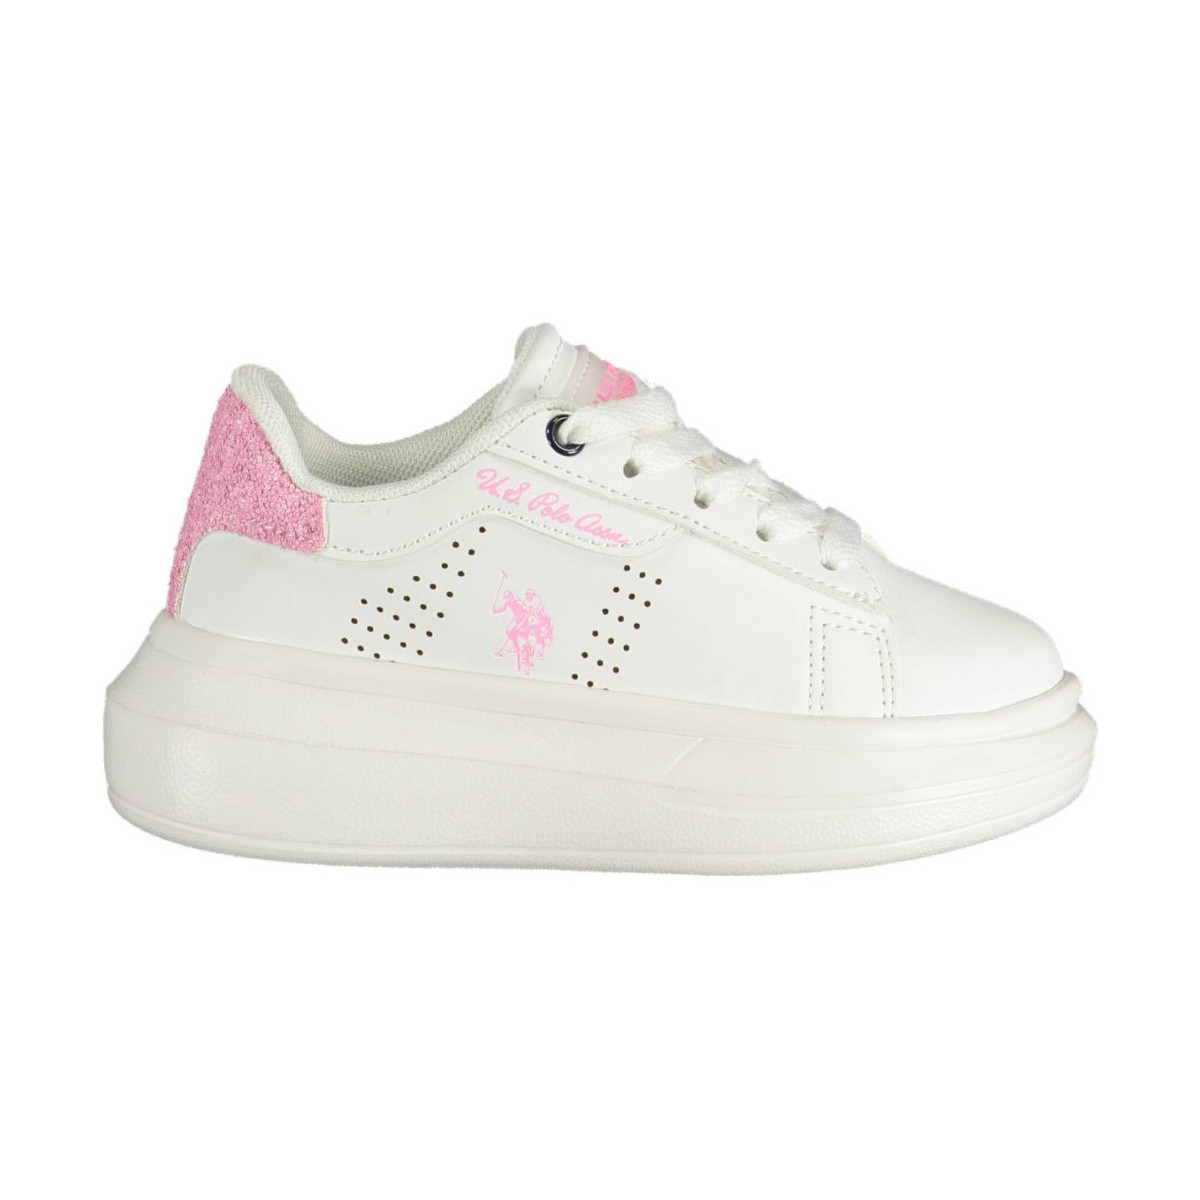 Chaussures Fille Baskets mode U.S Polo Assn. SNEAKERS ENFANT BLANC/ROSE 